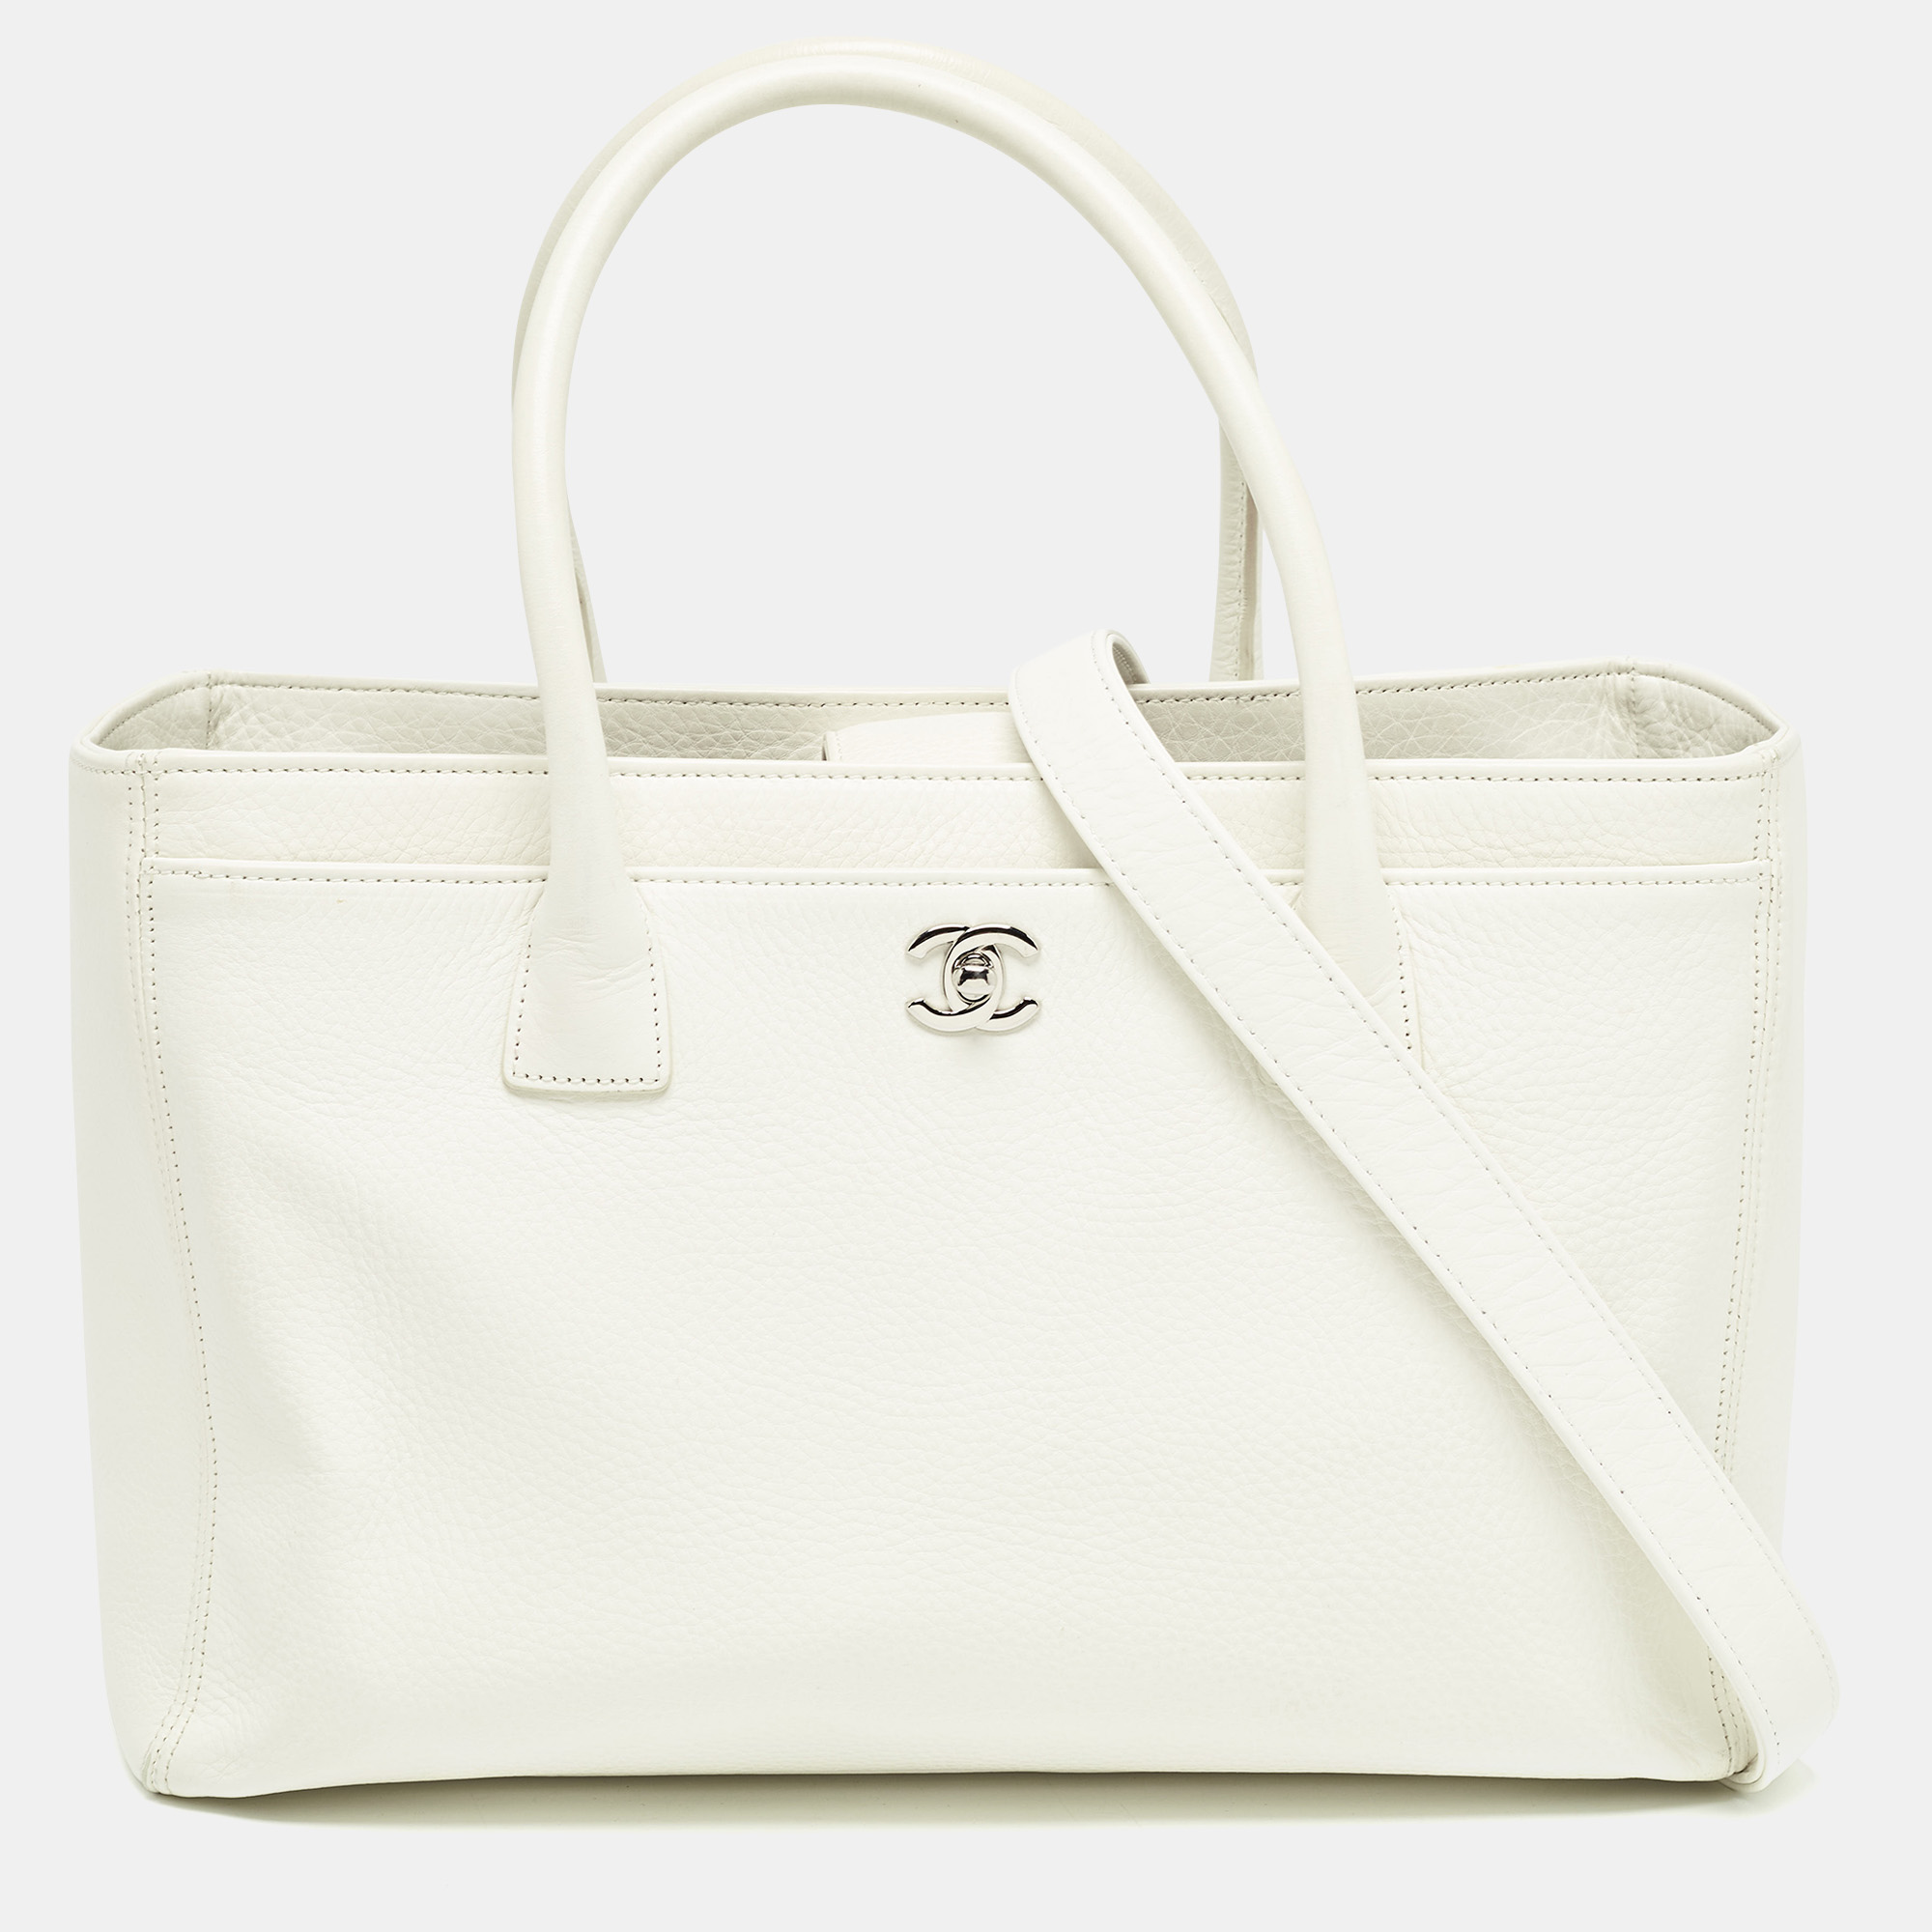 Chanel white leather cerf shopper tote